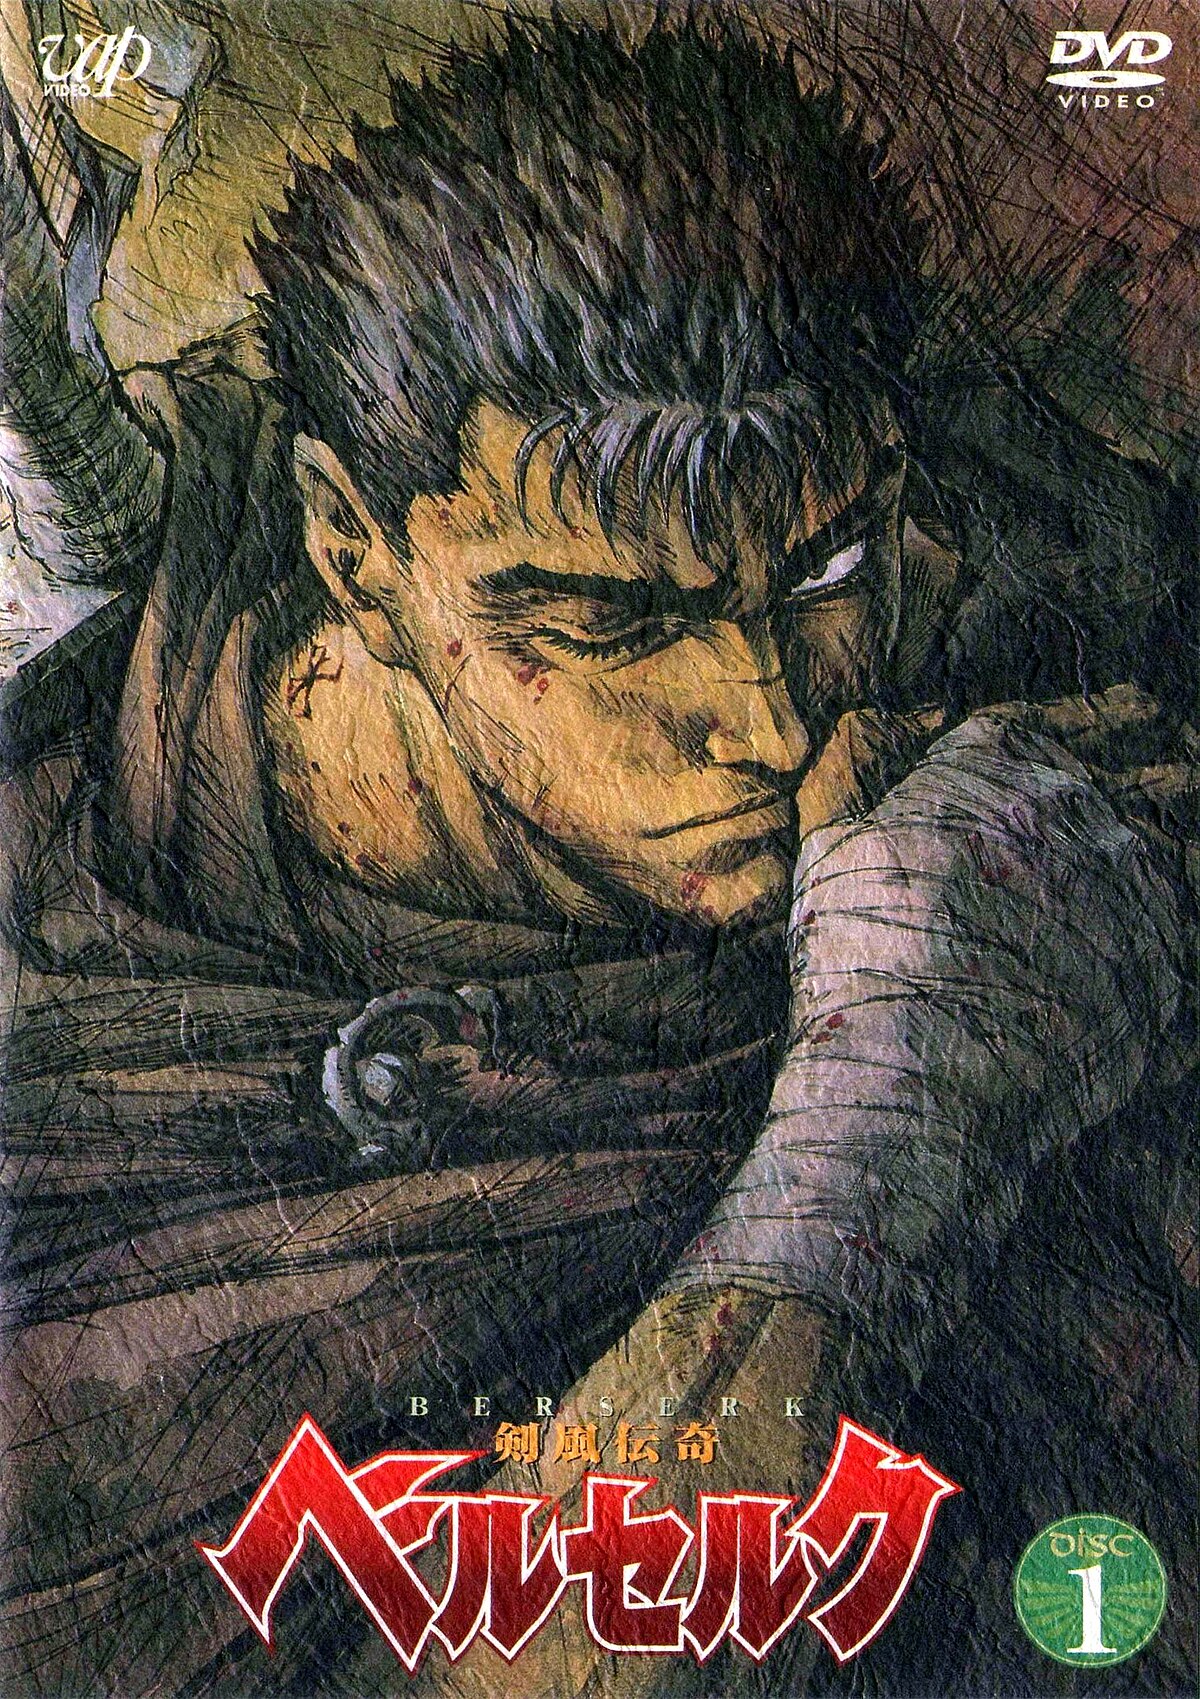 Berserk: Season 3 - Everything You Should Know - Cultured Vultures